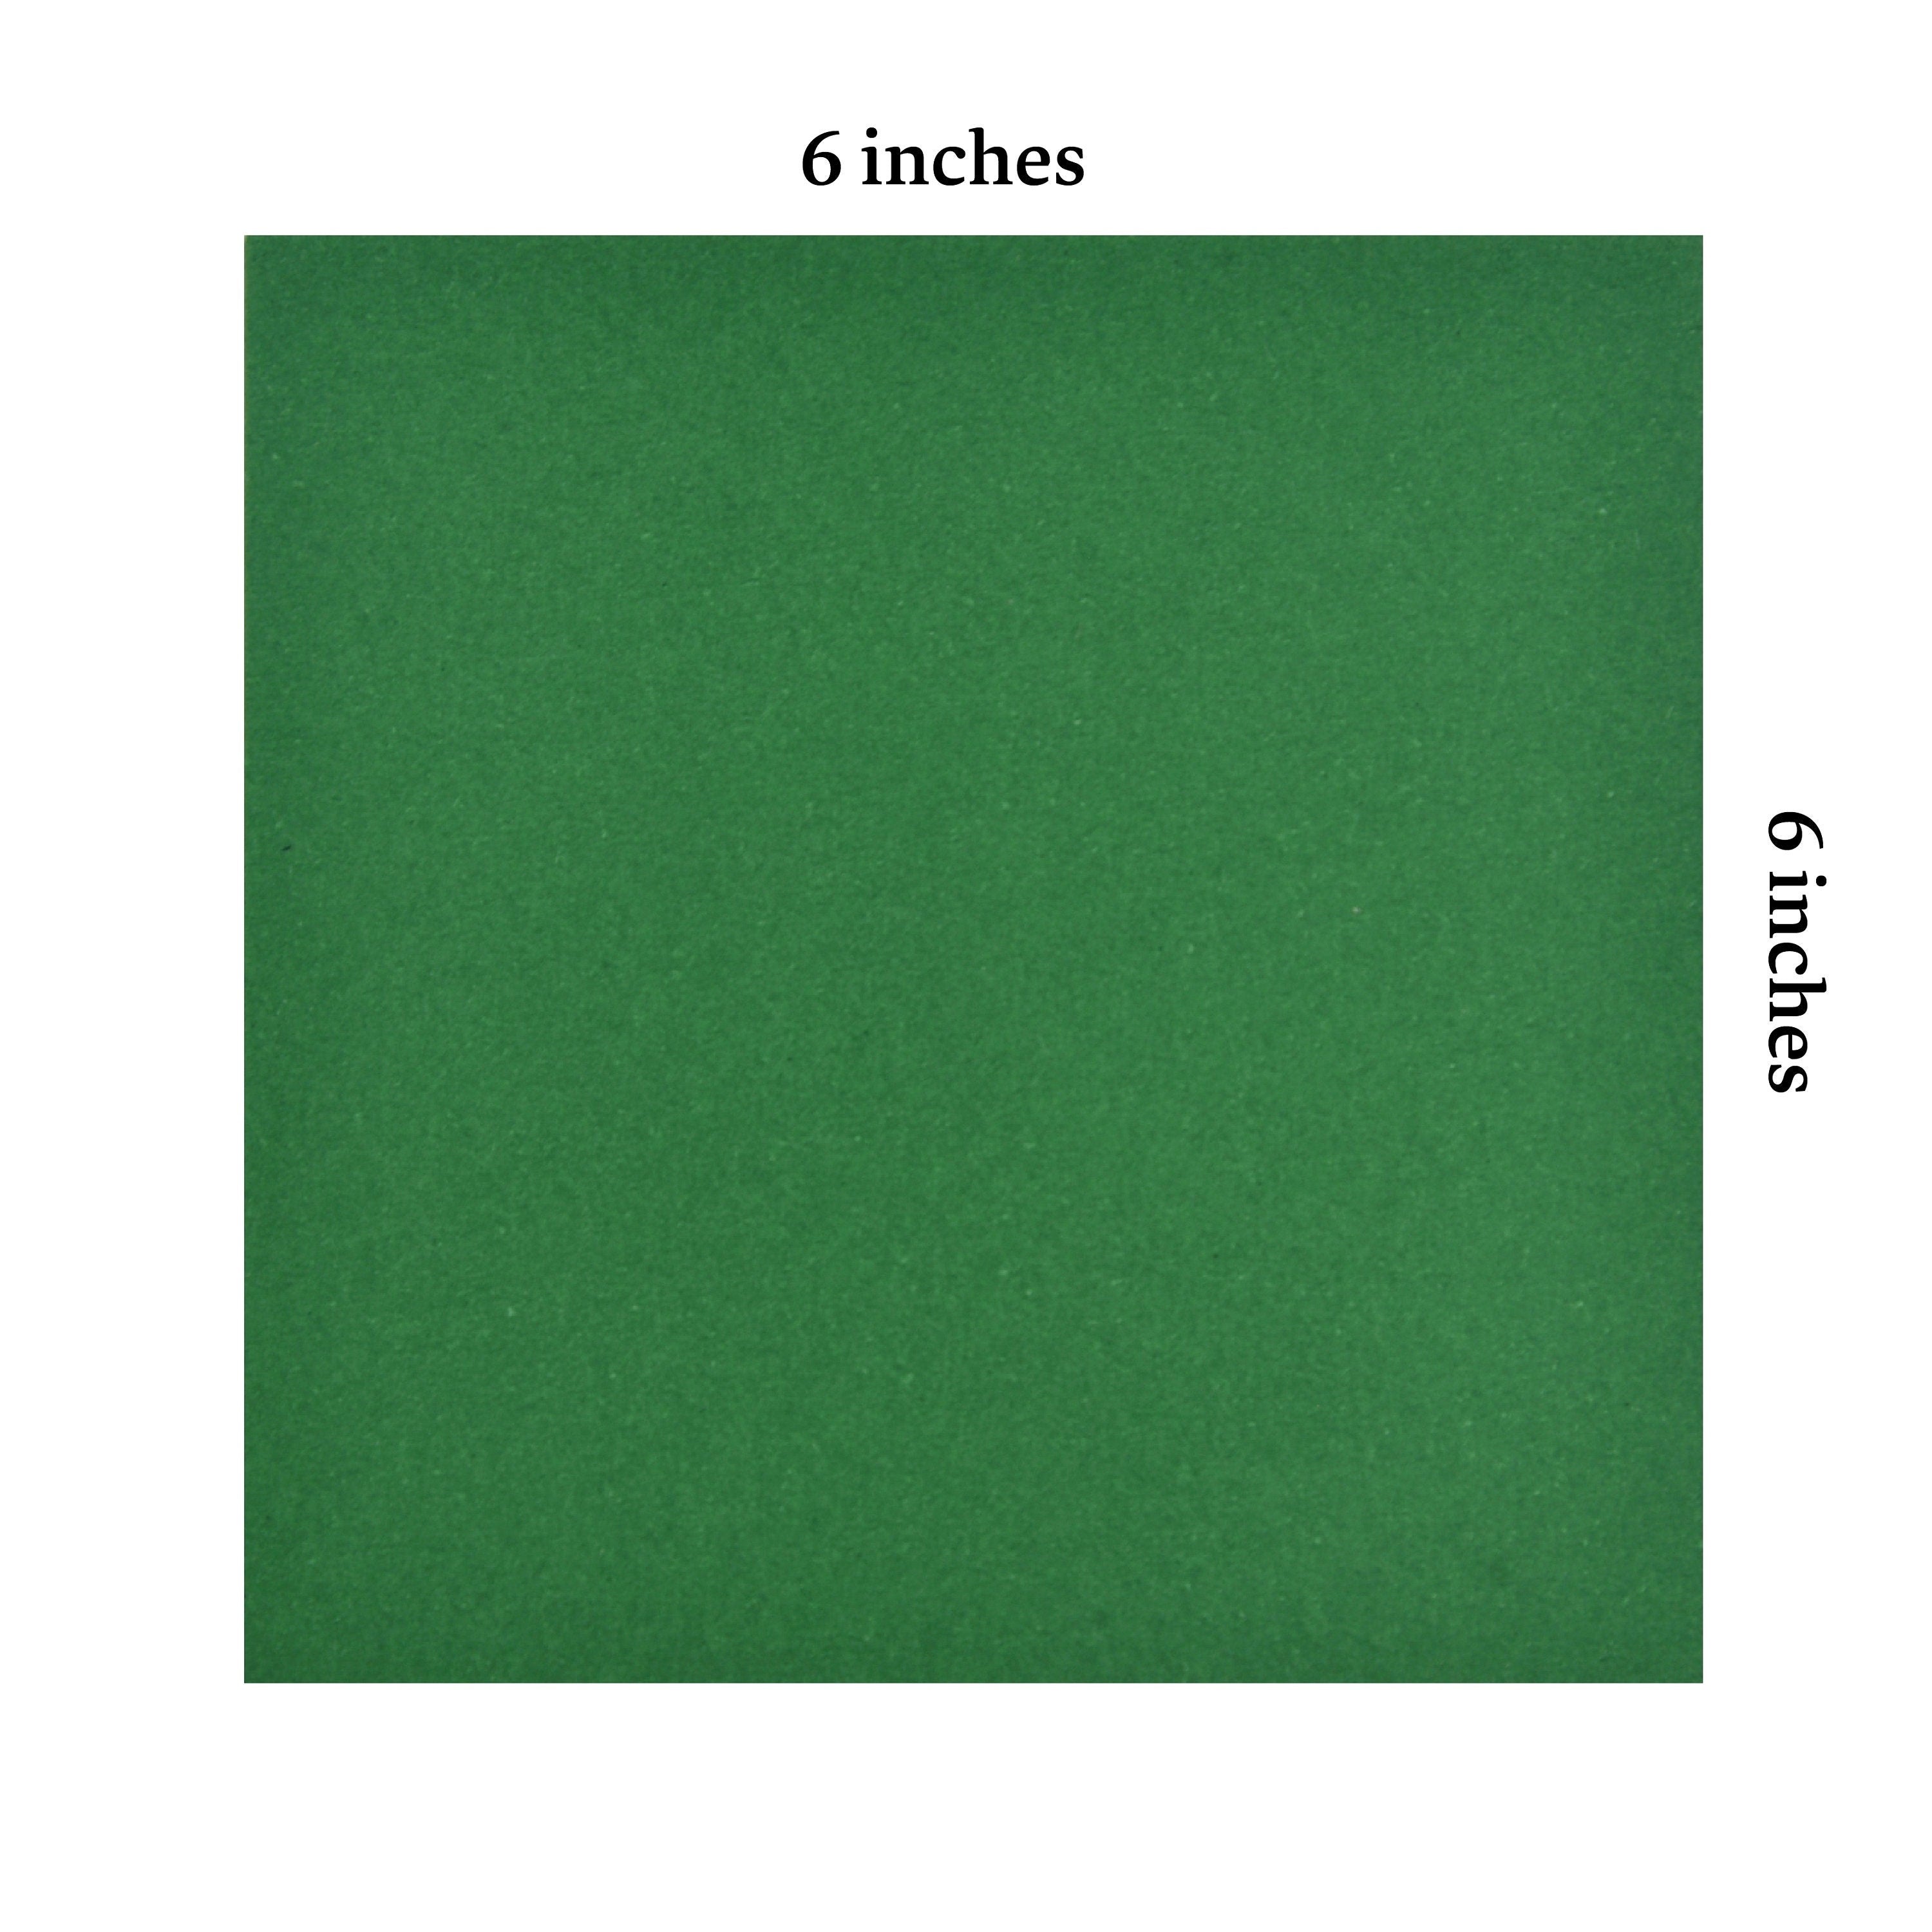 100 Green Origami Paper Sheets 6x6 inches Square Paper Pack for Folding, Origami Cranes, and Decoration - S24